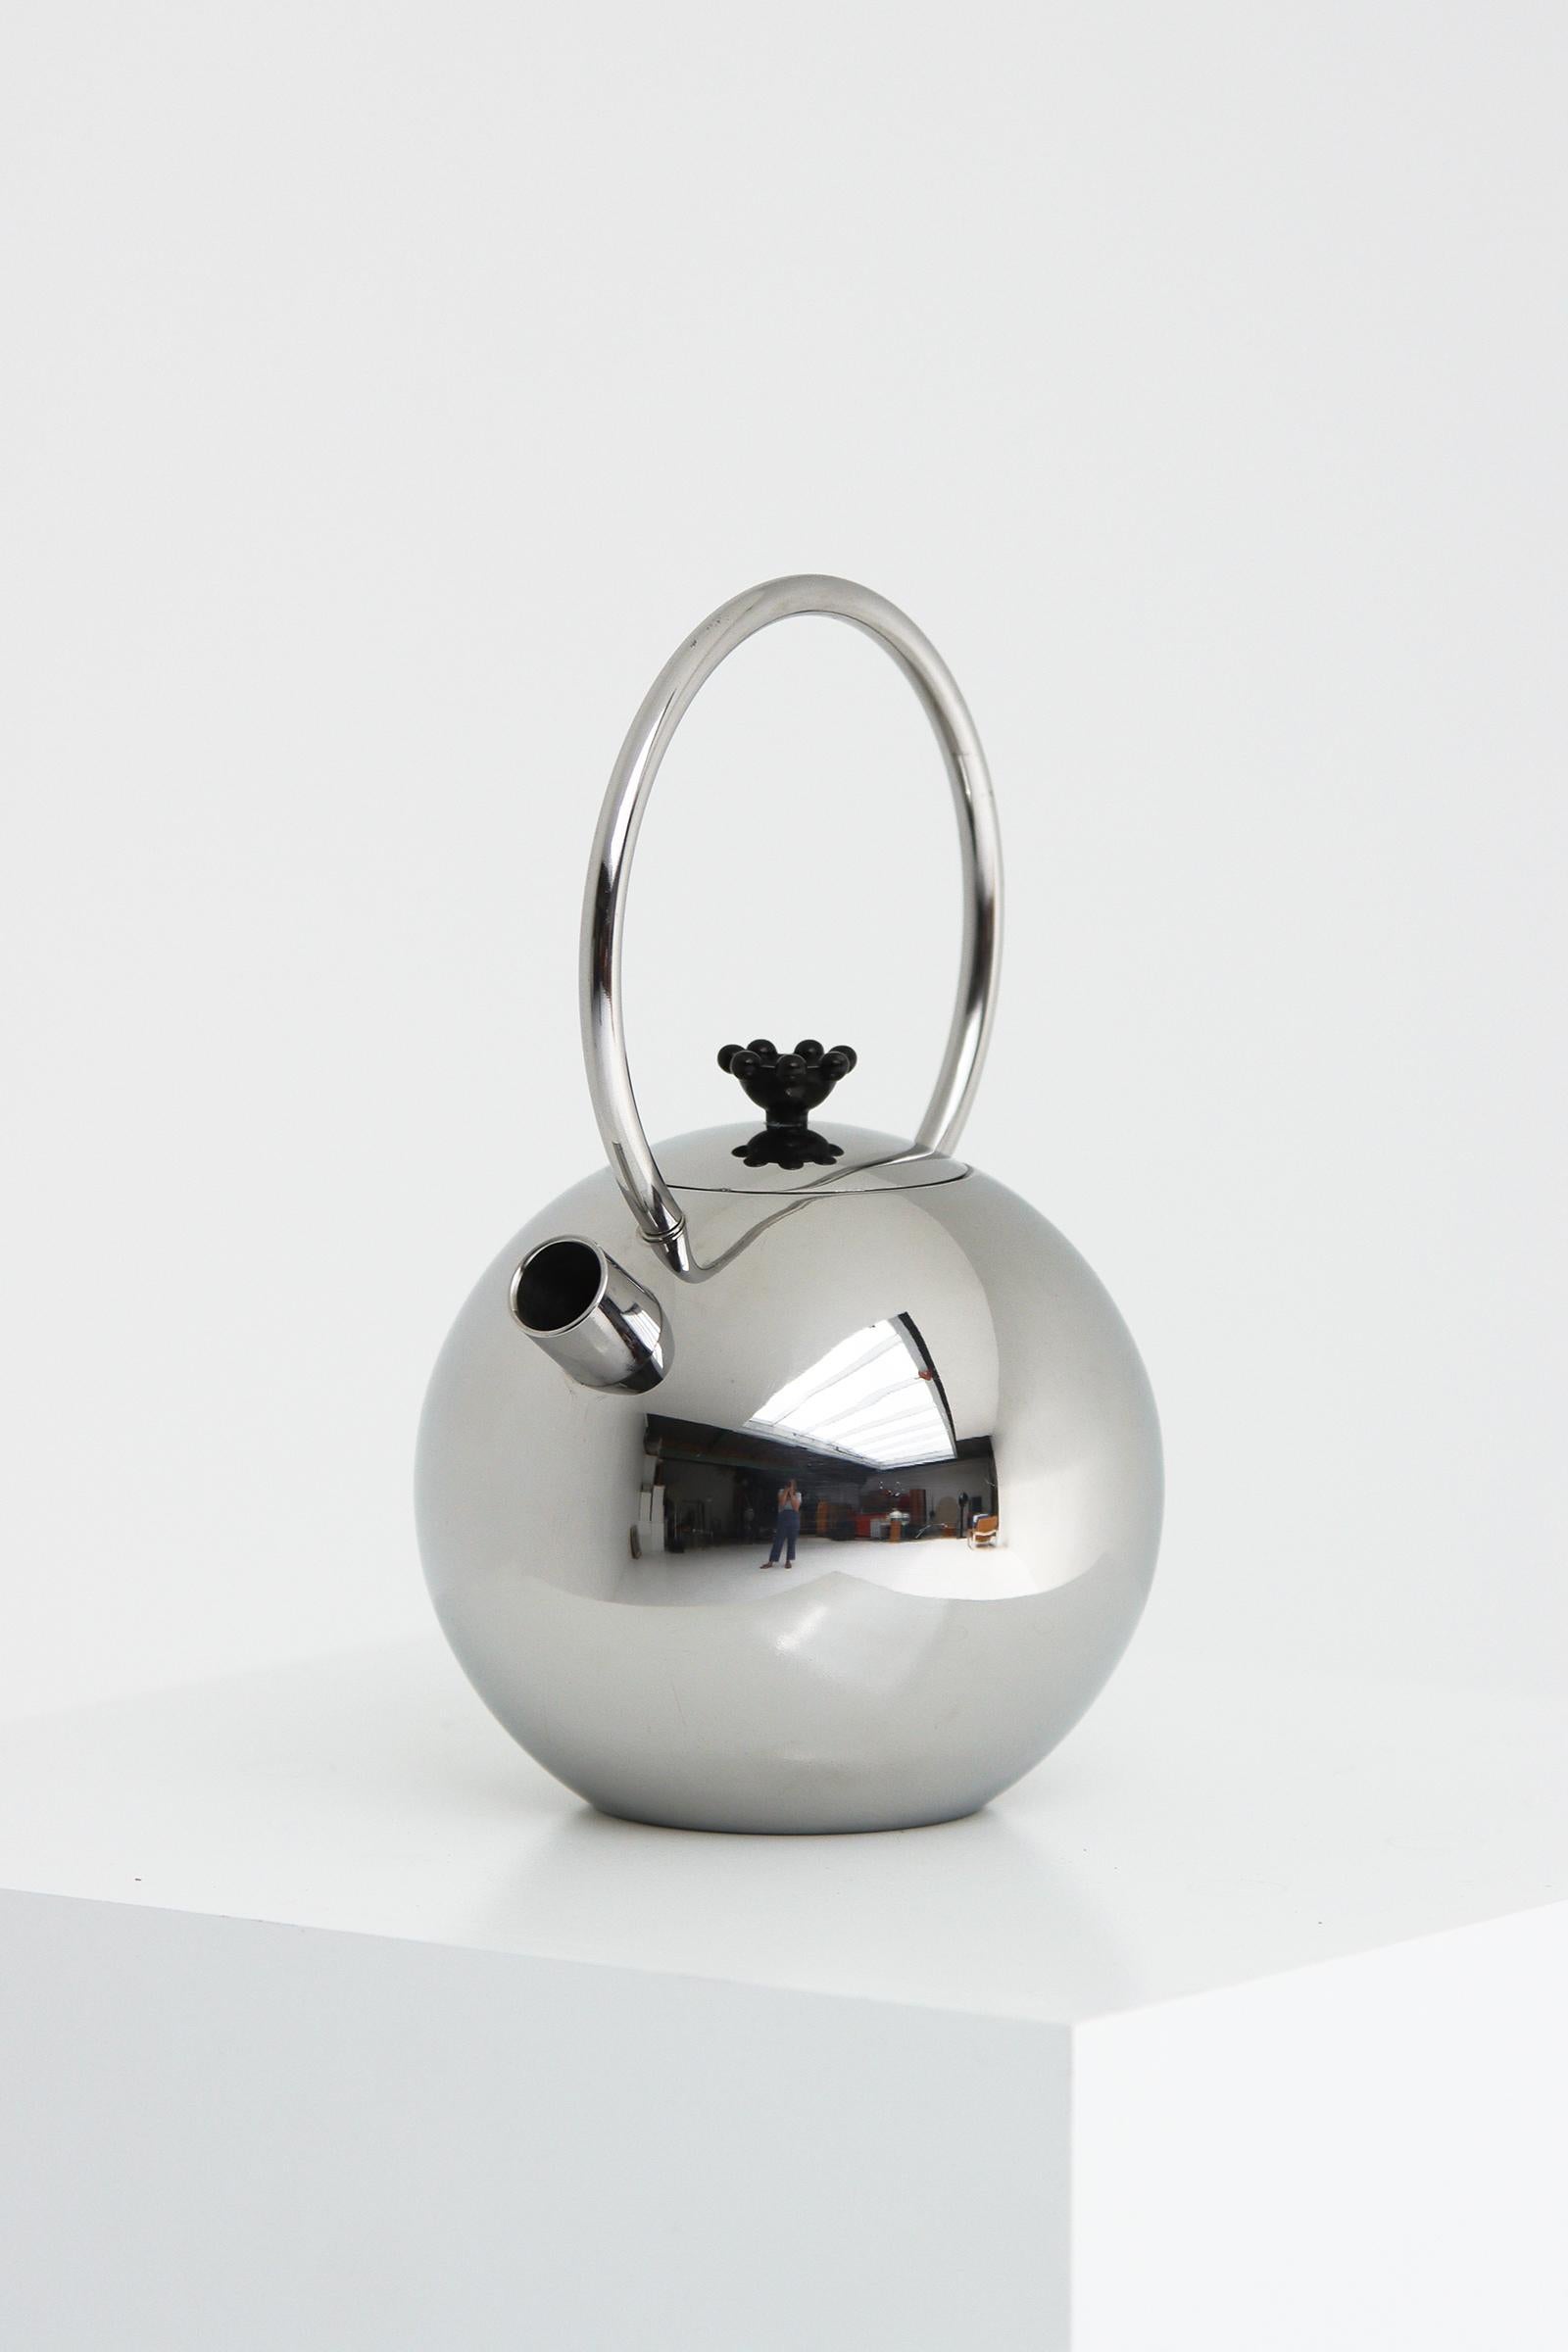 Modern teapot designed by Matteo Thun for WMF Cromagan in 1989. The King edition products from 1989 are collectibles, the series has been out of production for years. Bold lines and curved shapes, enhanced by the reflecting metal surface are the